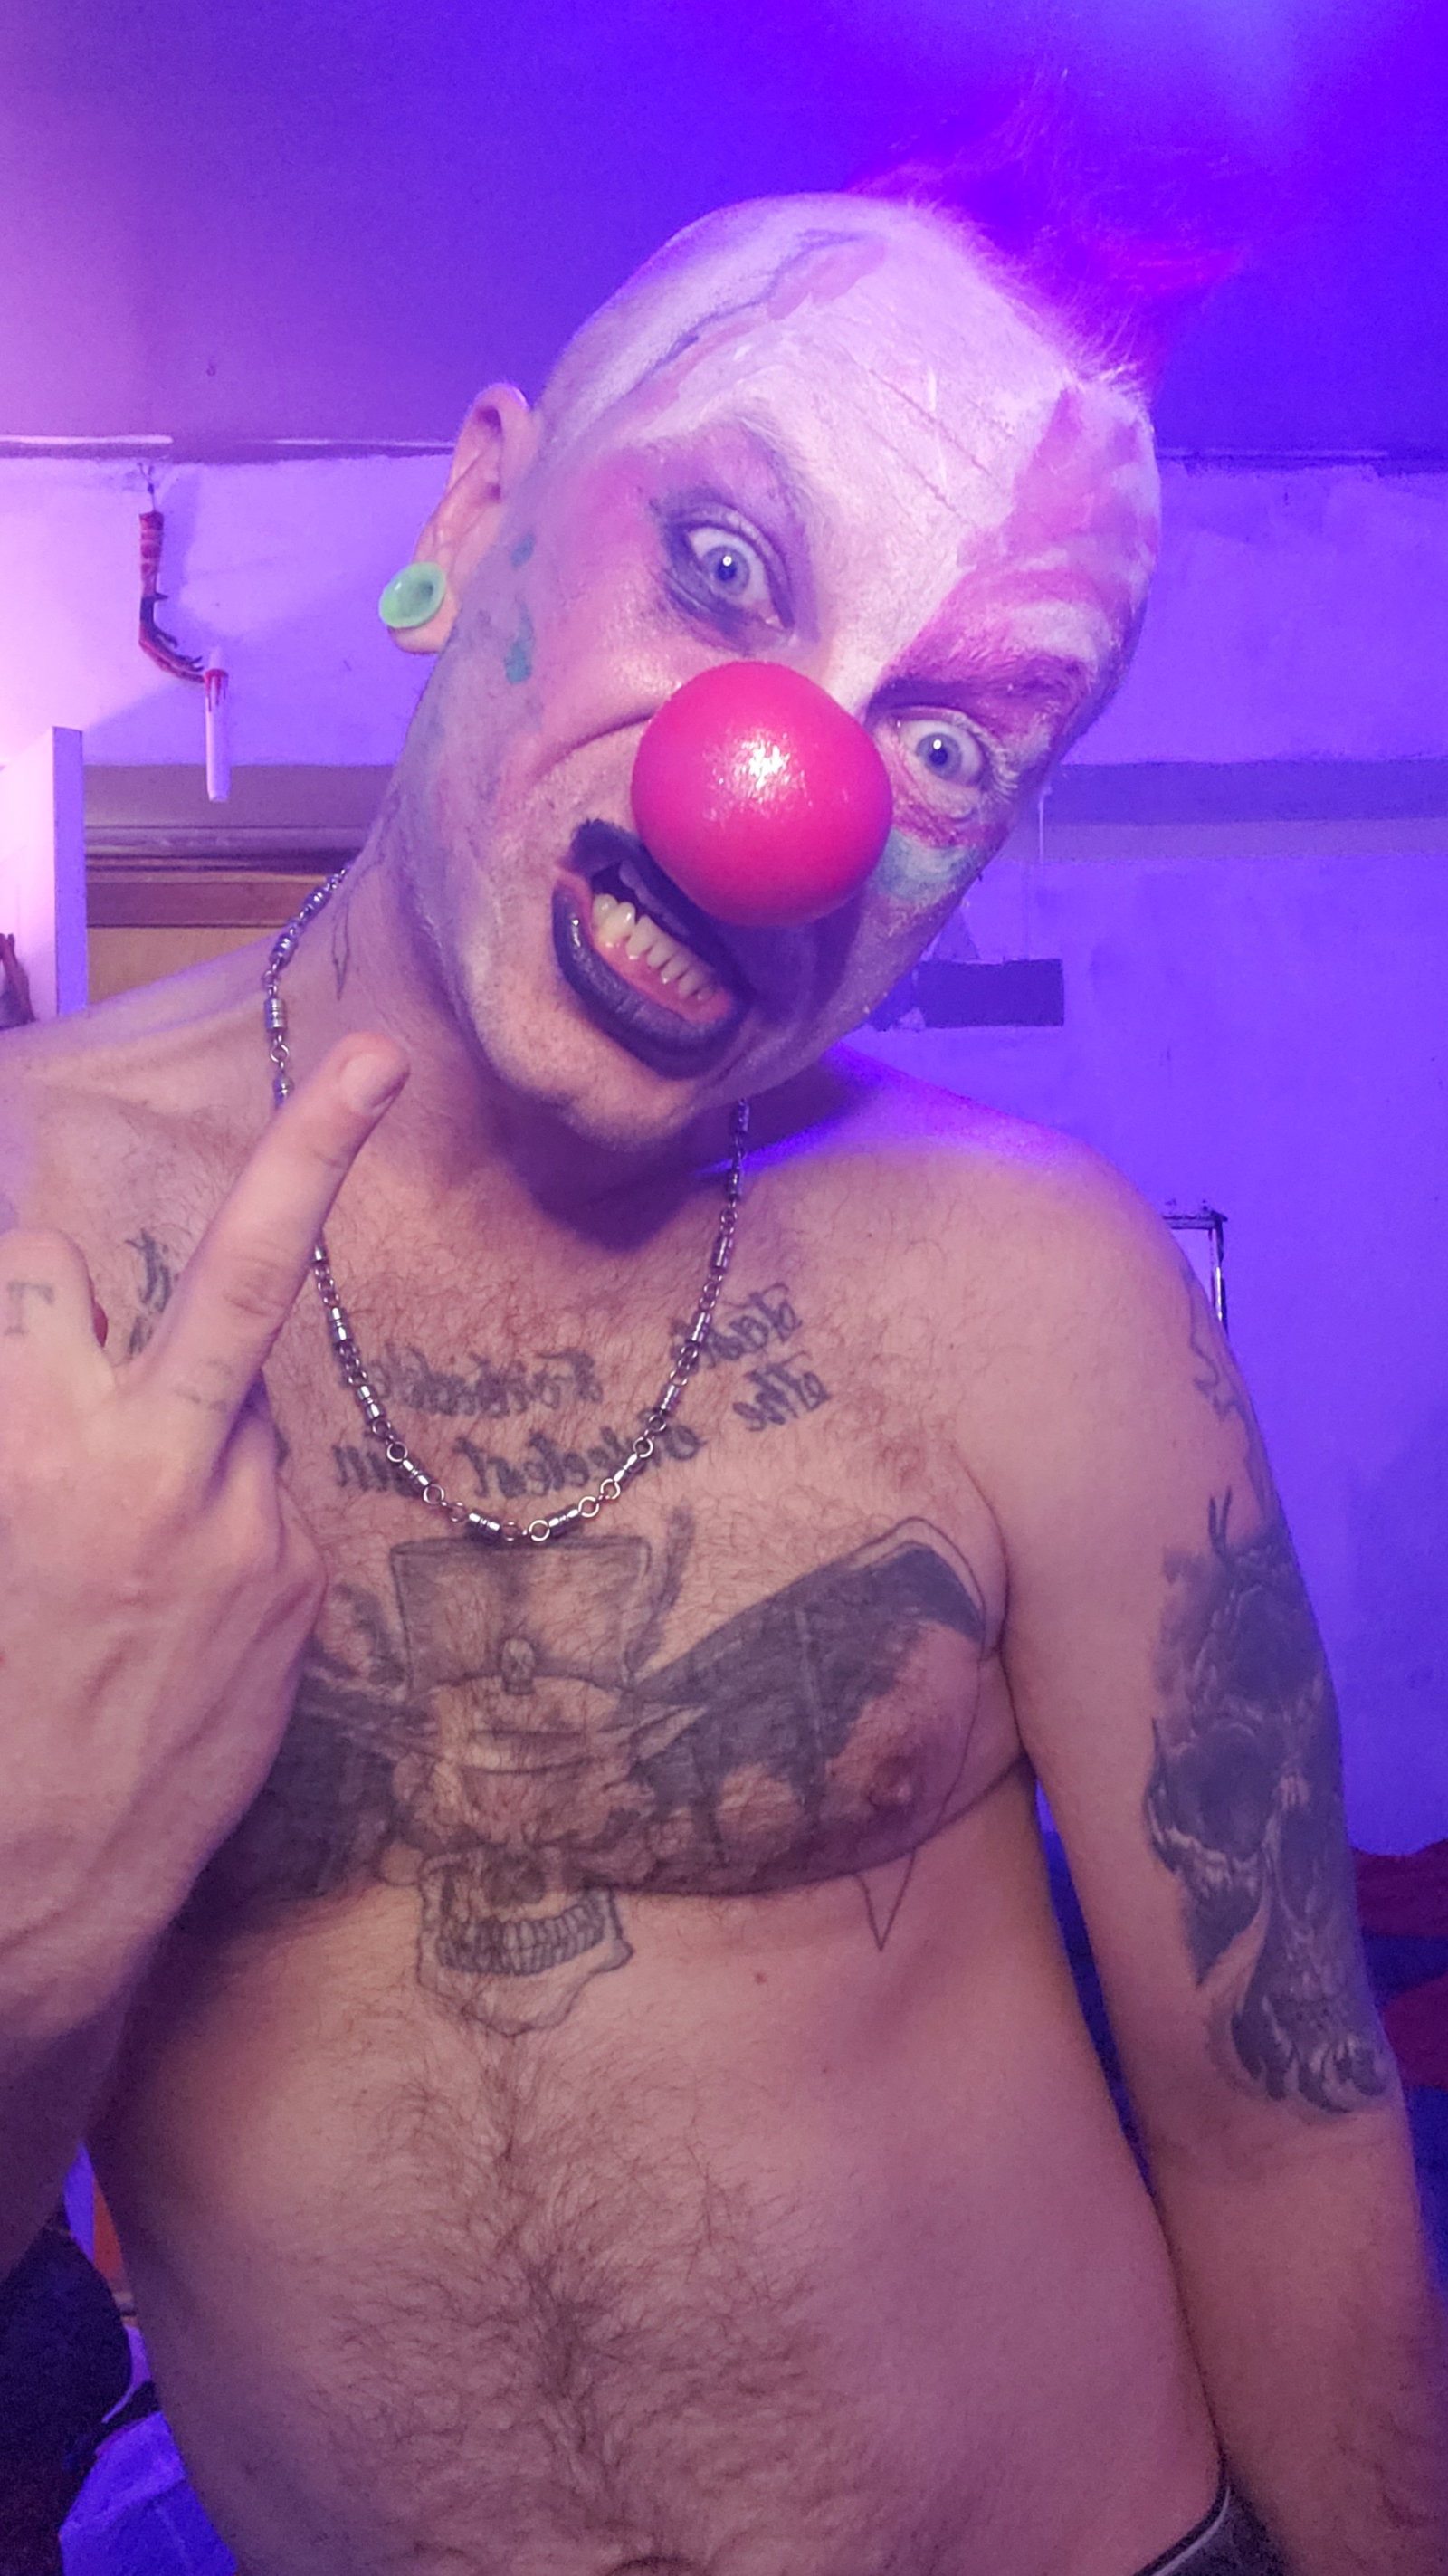 Photo by delsin pistons with the username @delsinpistons, who is a star user,  October 24, 2020 at 2:19 AM and the text says 'Delsin Pistons seventh knights of debauchery starts tonight follow mr on twitter and other platforms for more  #gayclownporn #gaypornstar'